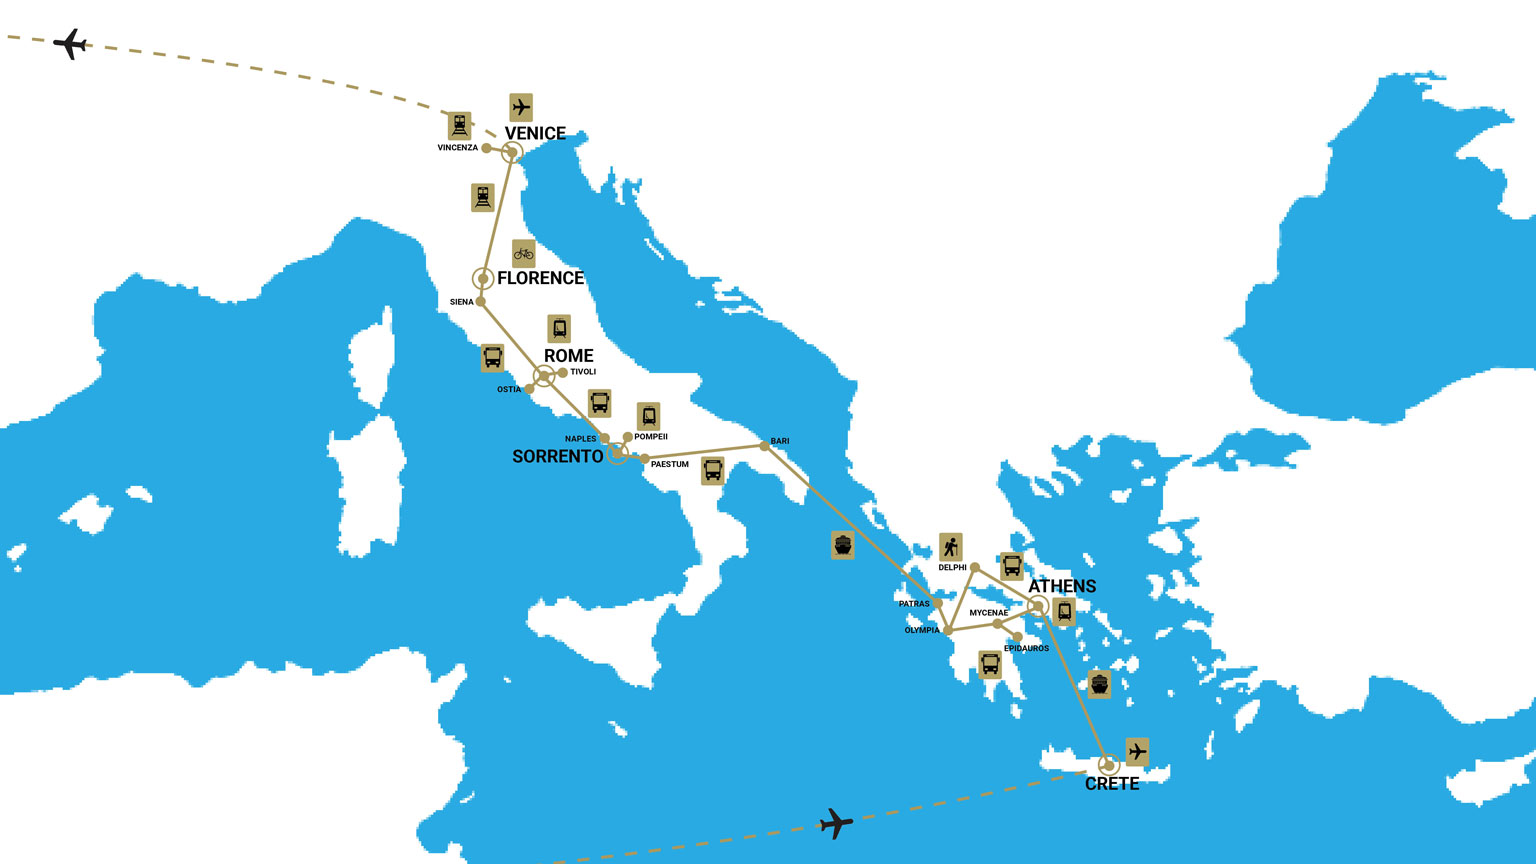 Program map in Greece and Italy